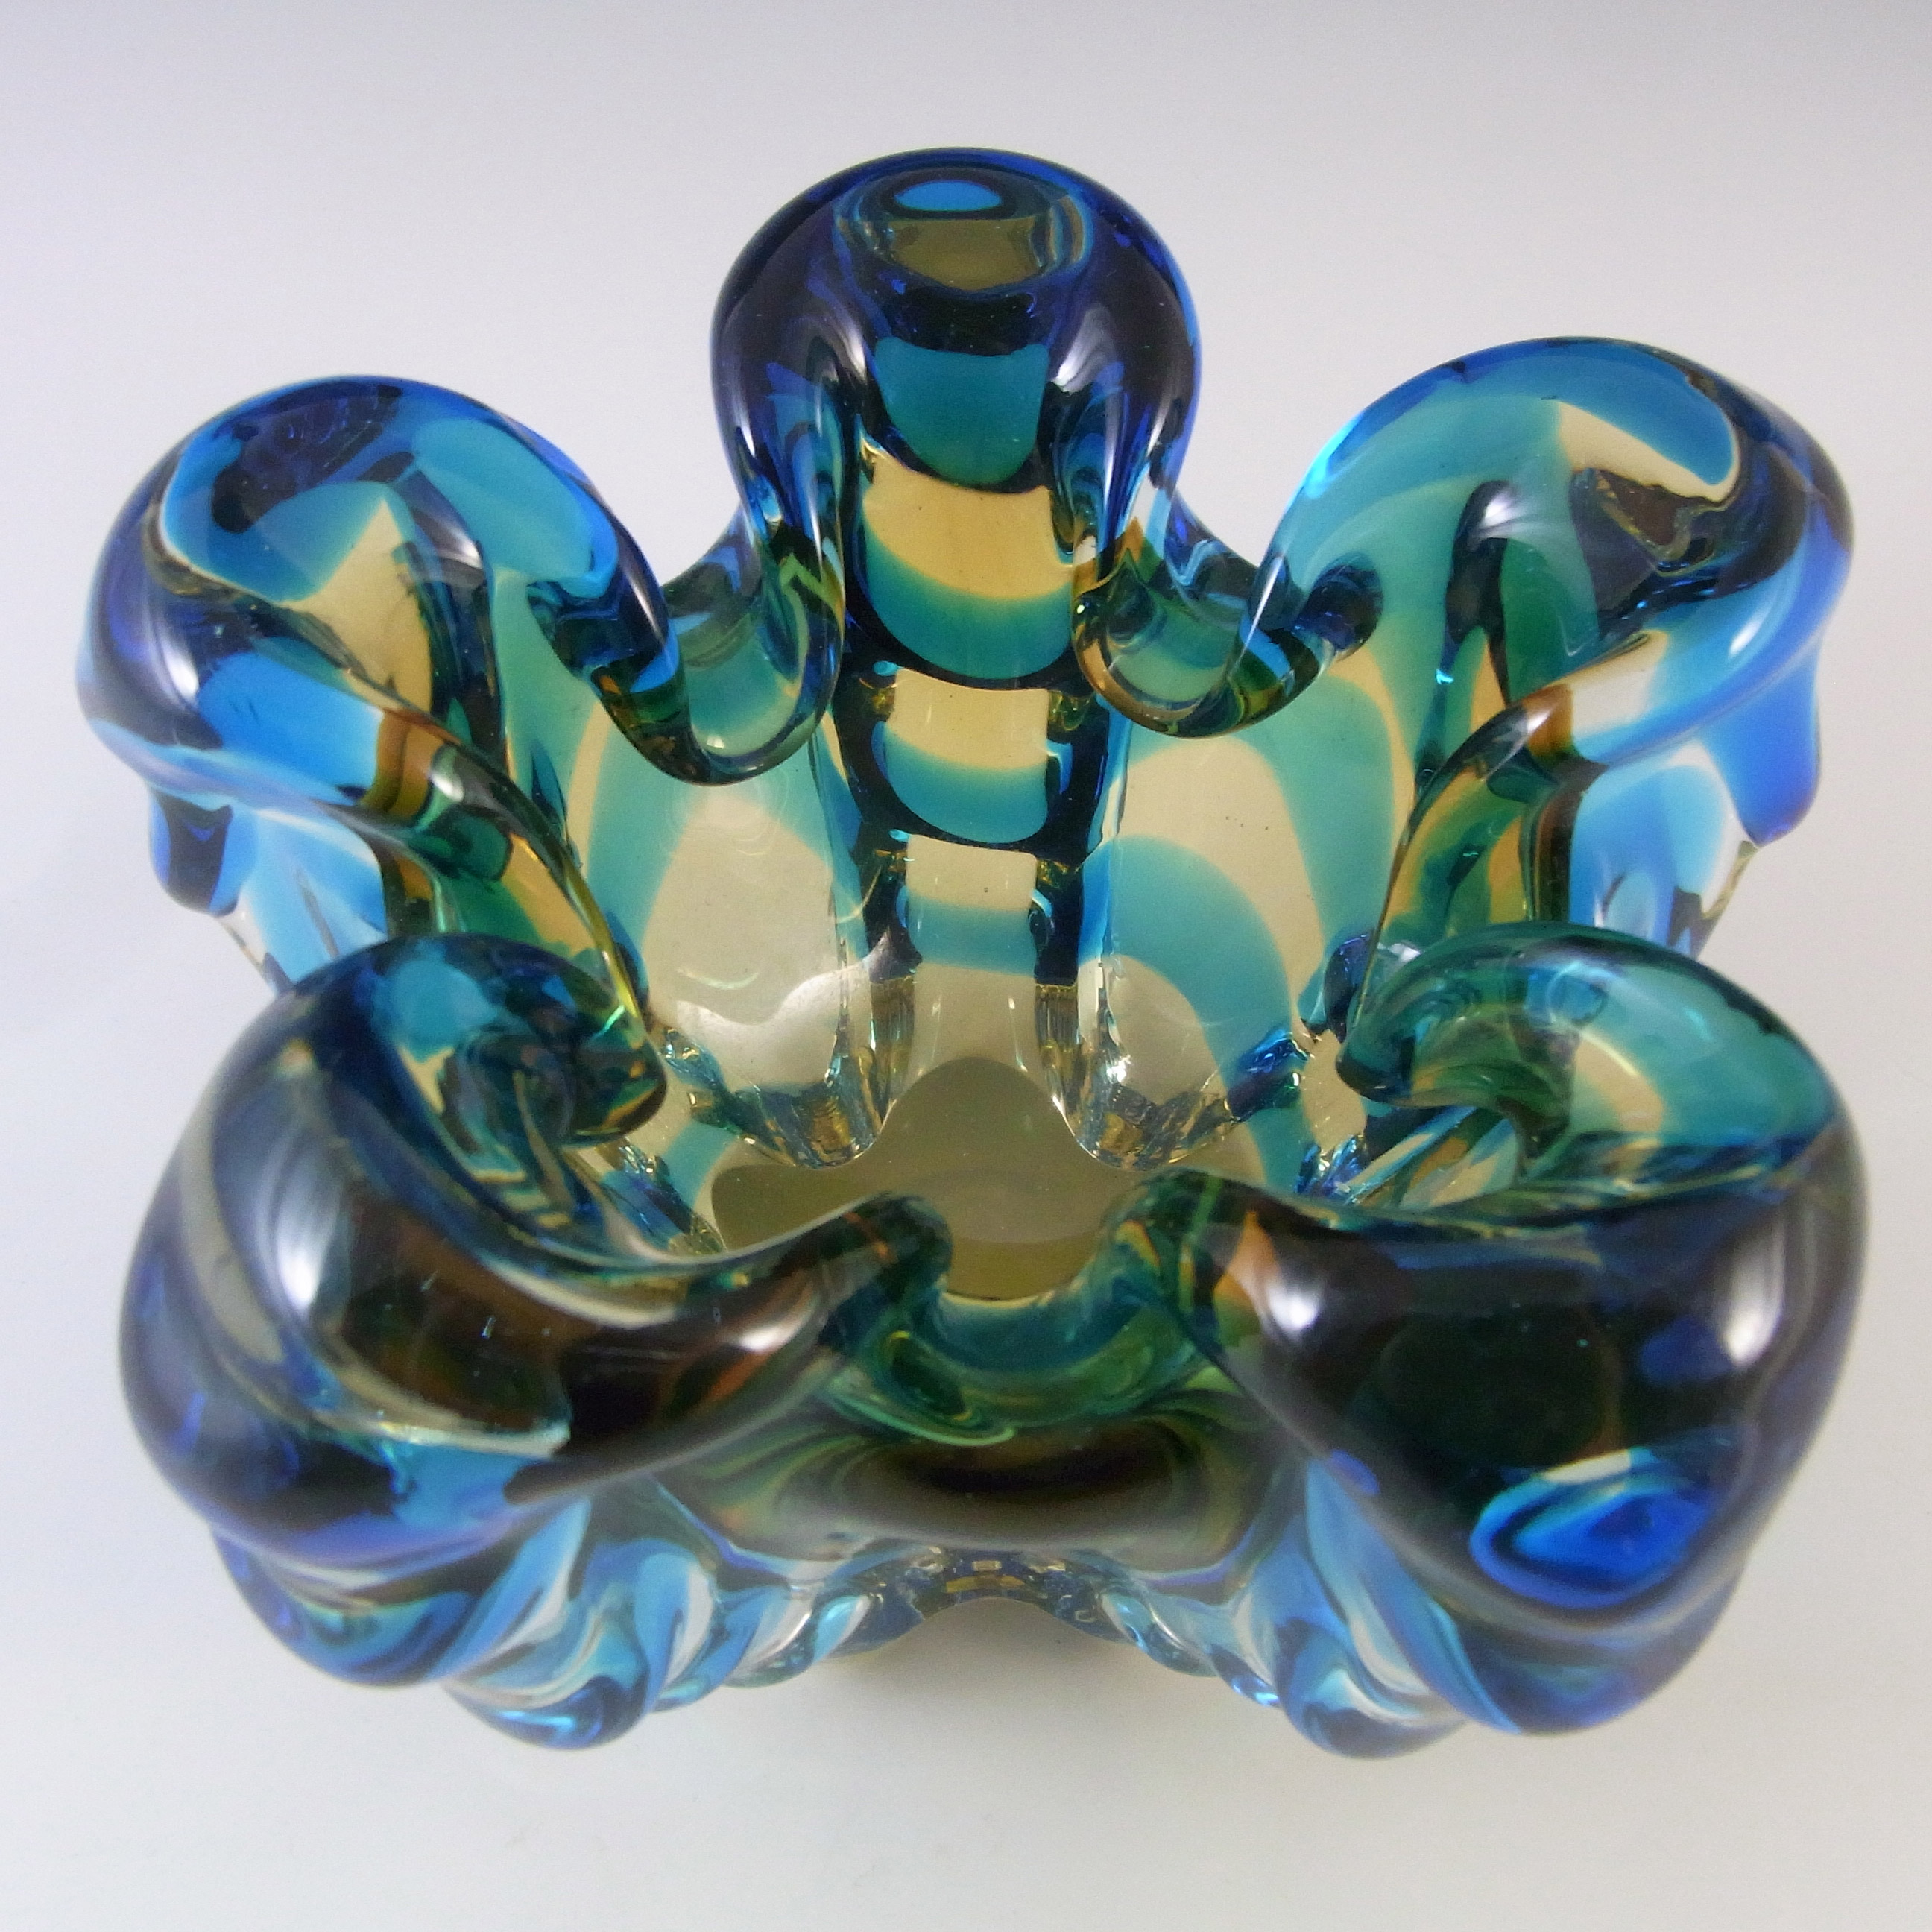 Japanese Amber & Blue Glass Organic Vintage Sculpture Bowl - Click Image to Close